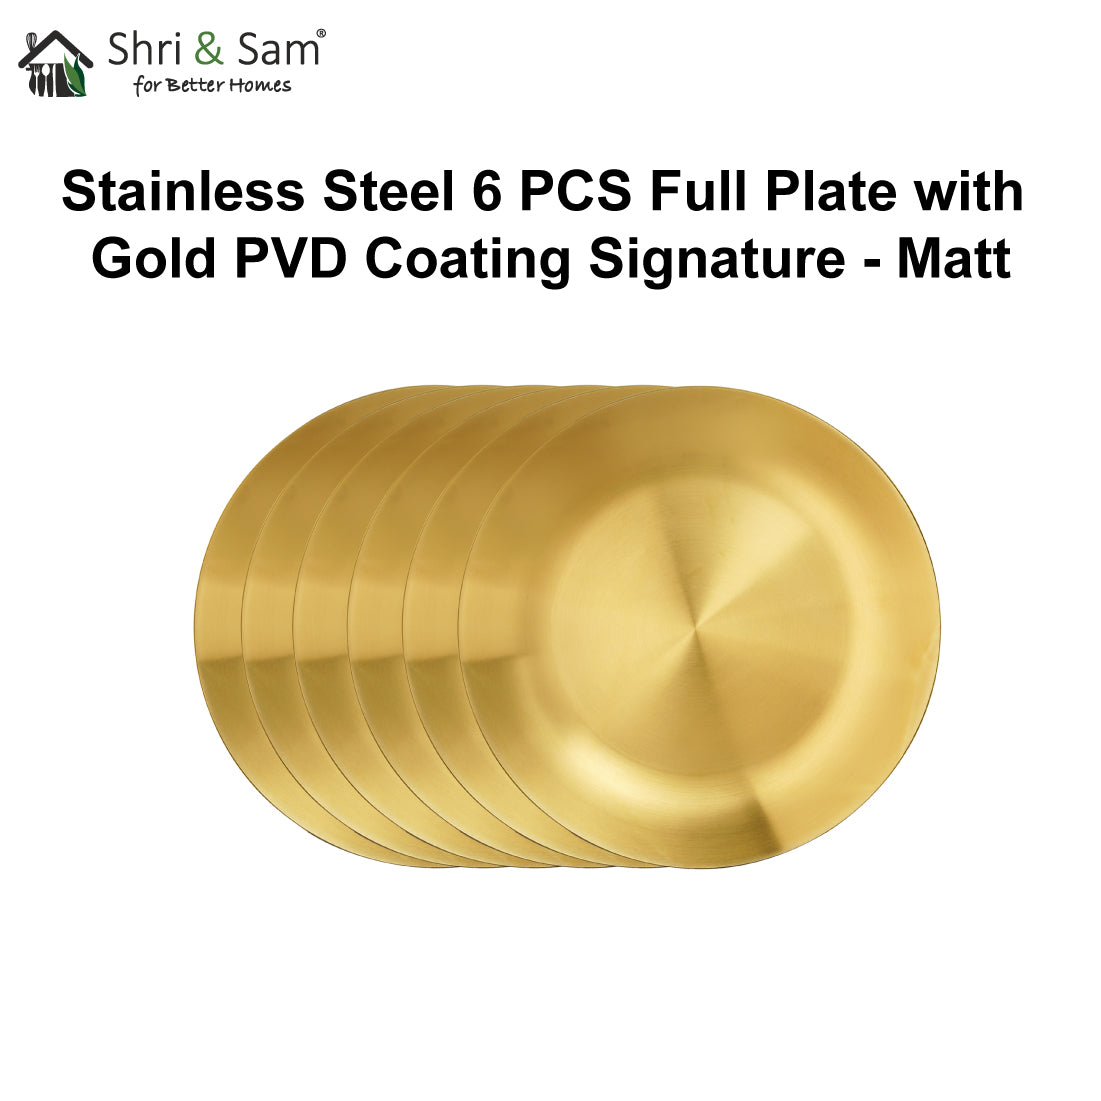 Stainless Steel 6 PCS Full Plate with Gold PVD Coating Signature - Matt